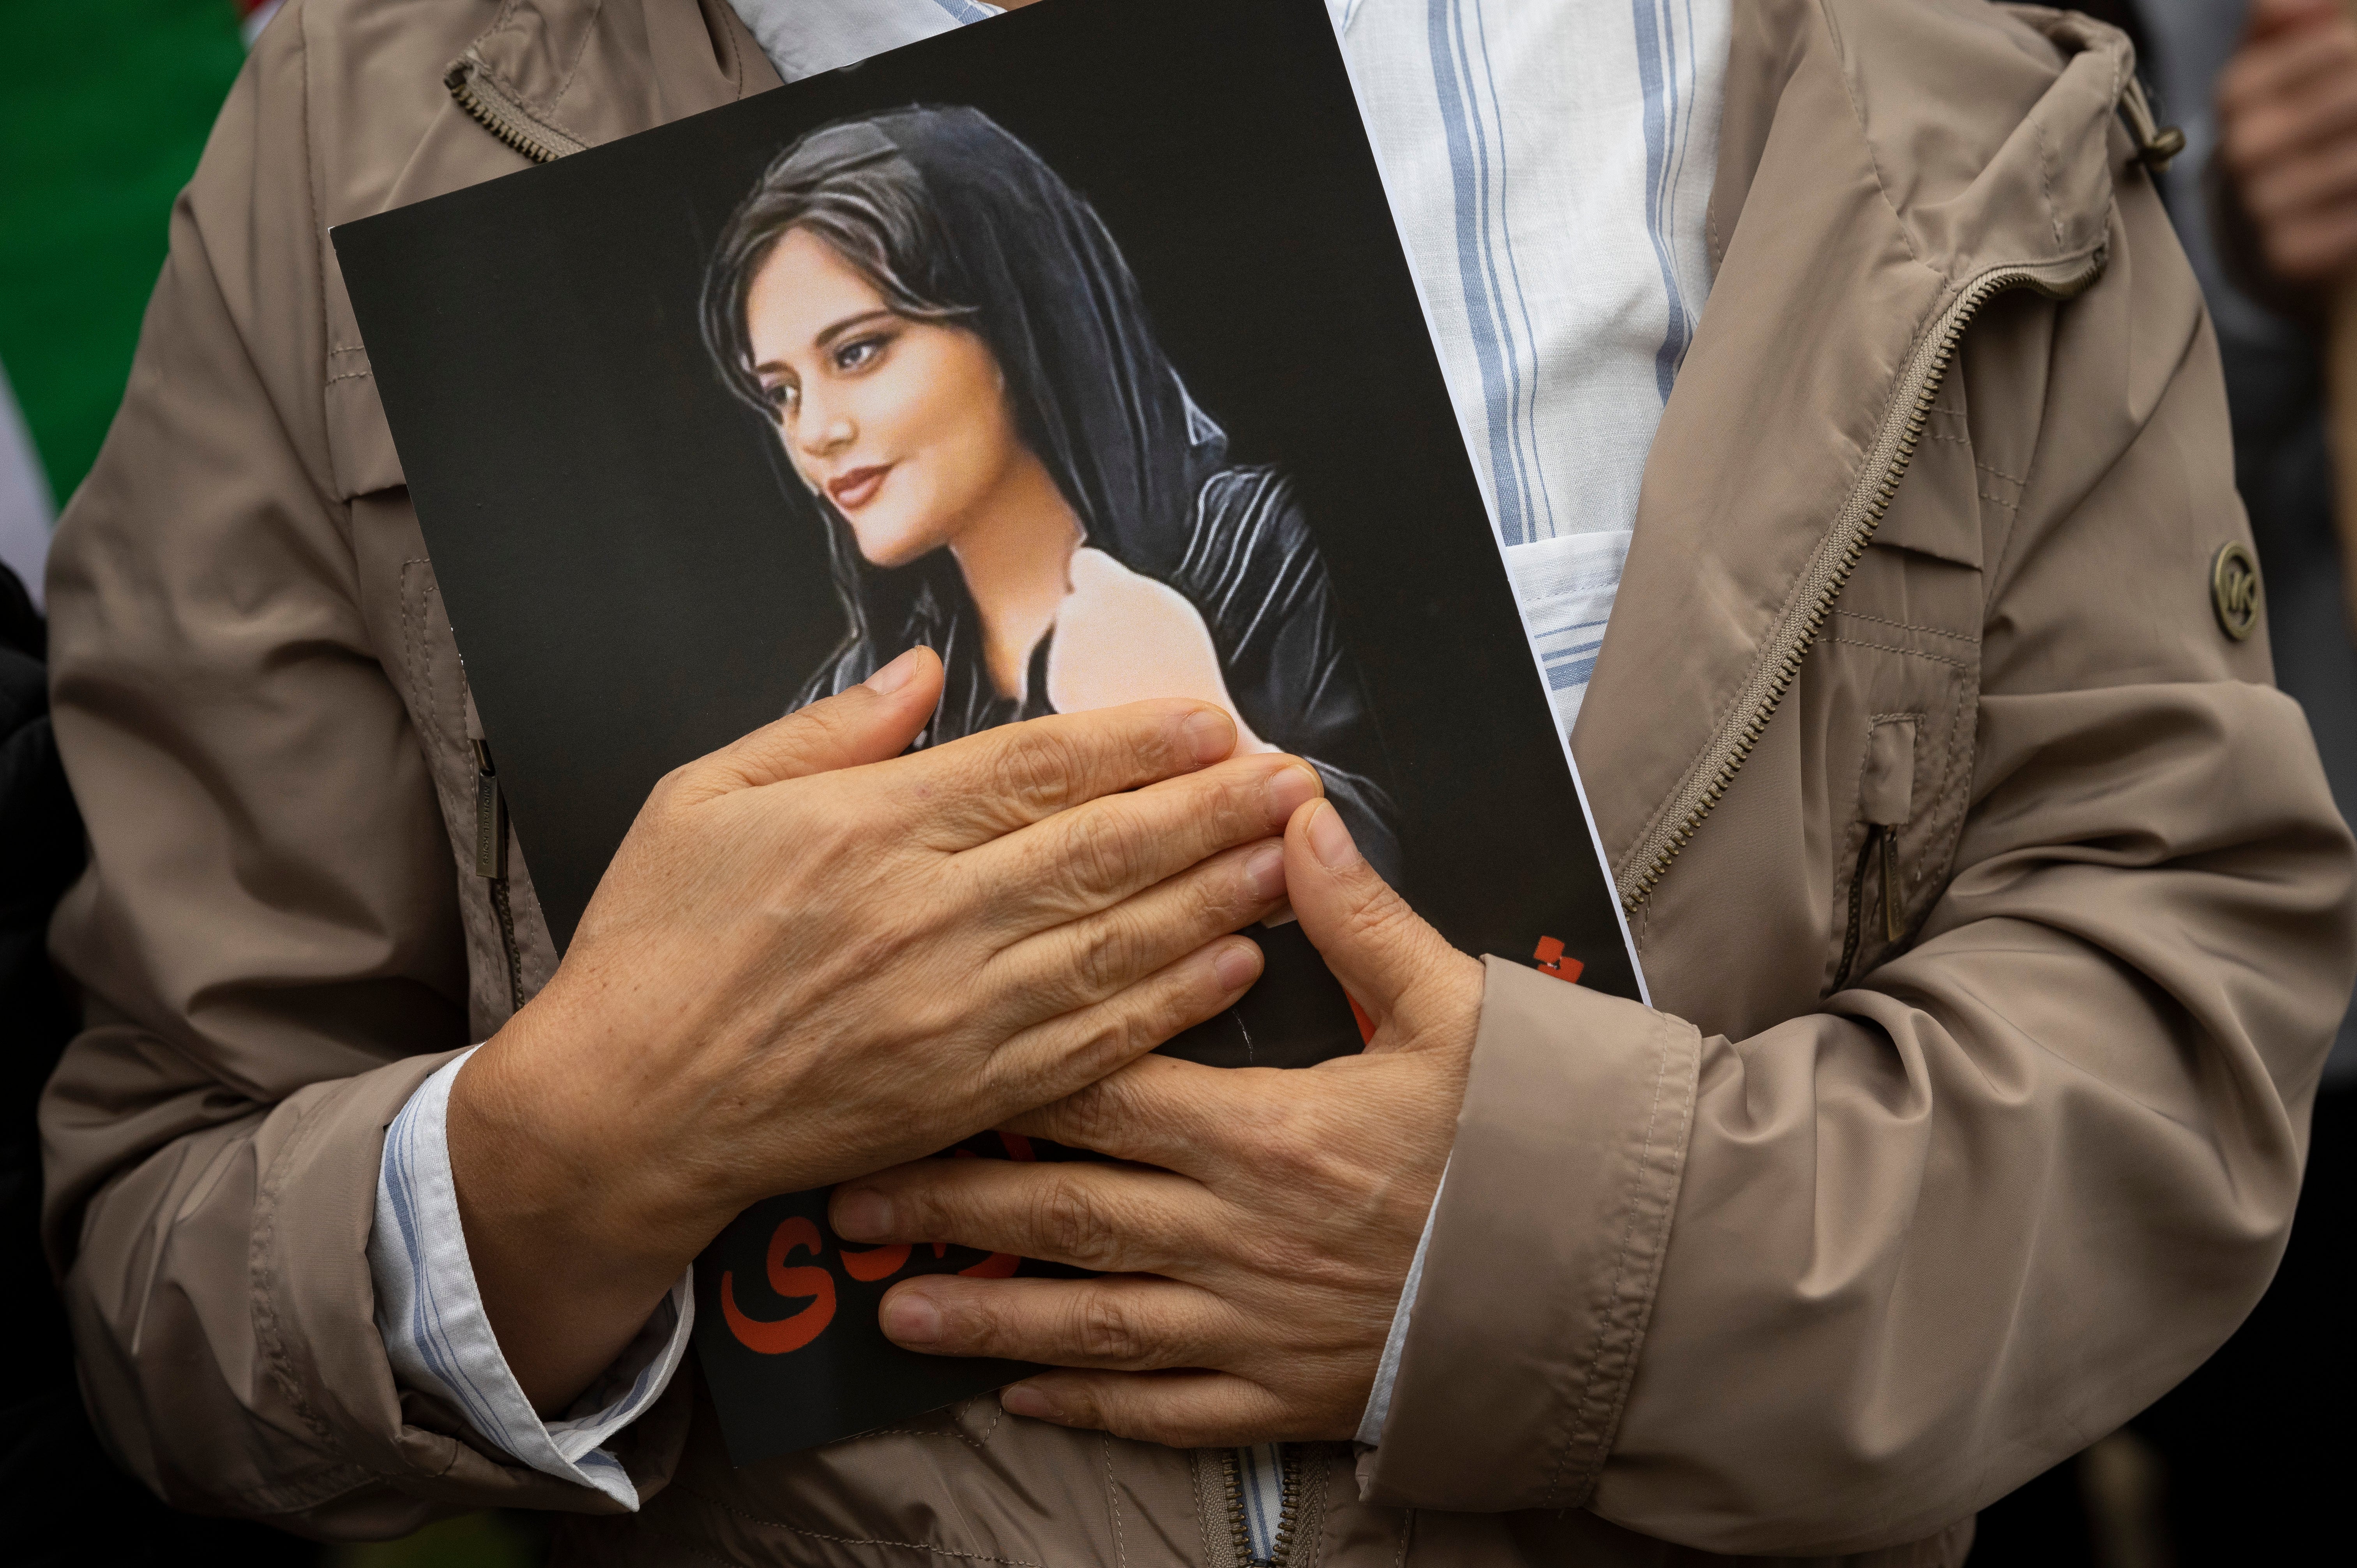 A portrait of Mahsa Amini is held during a rally calling for regime change in Iran